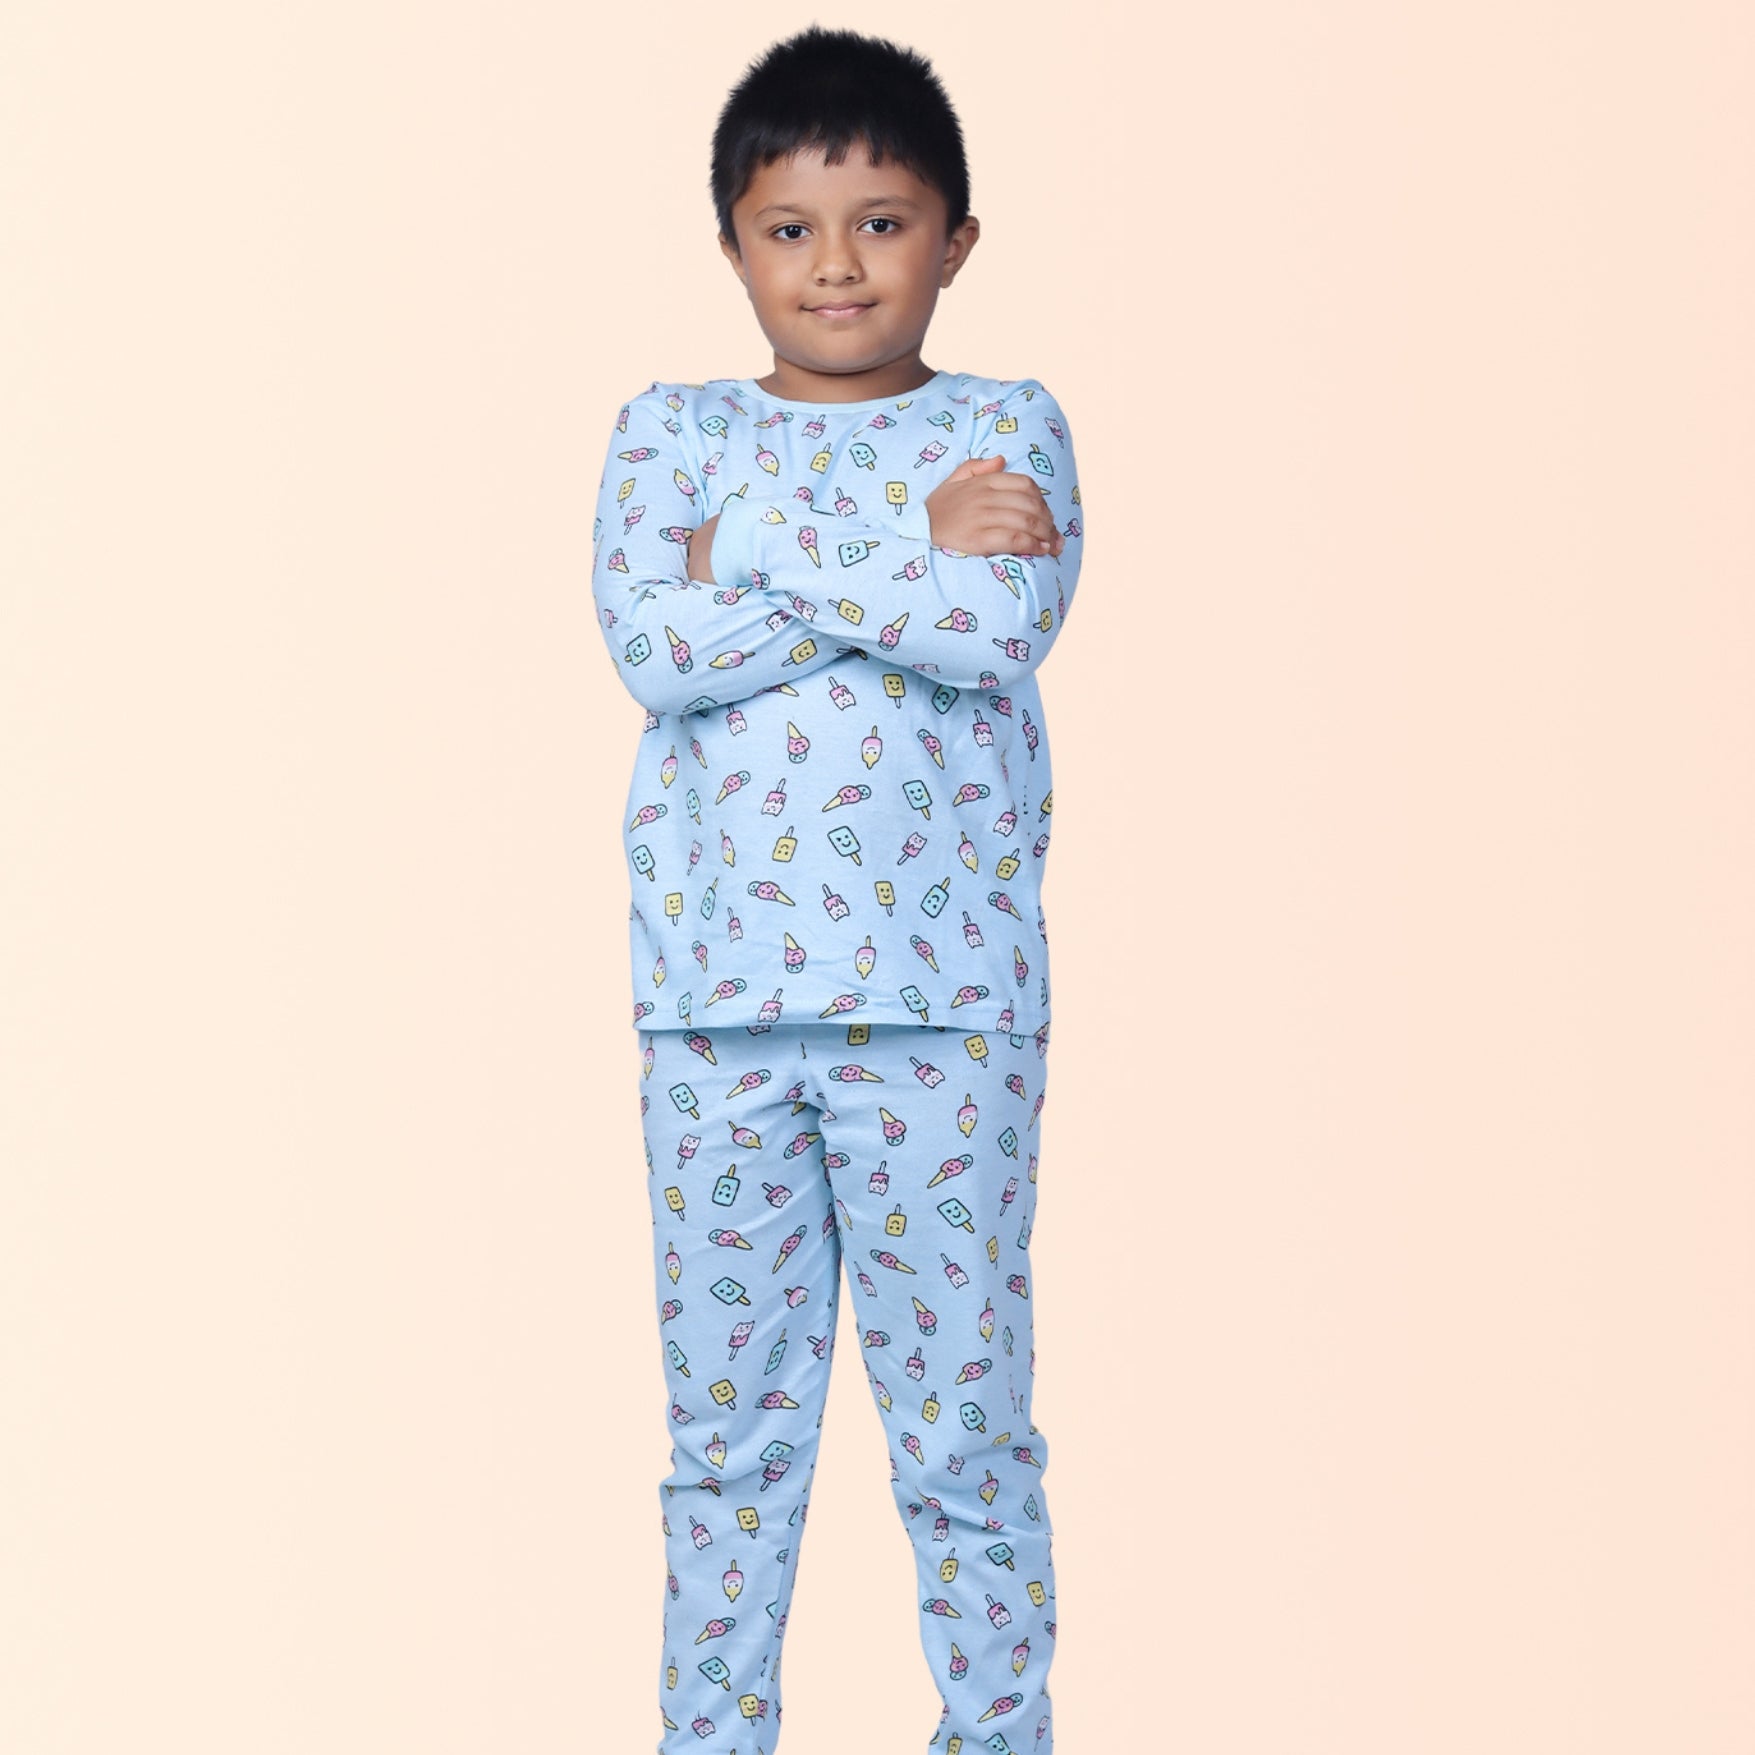 Full Sleeve Night Suit For Boy In Blue Colour - Ice Cream